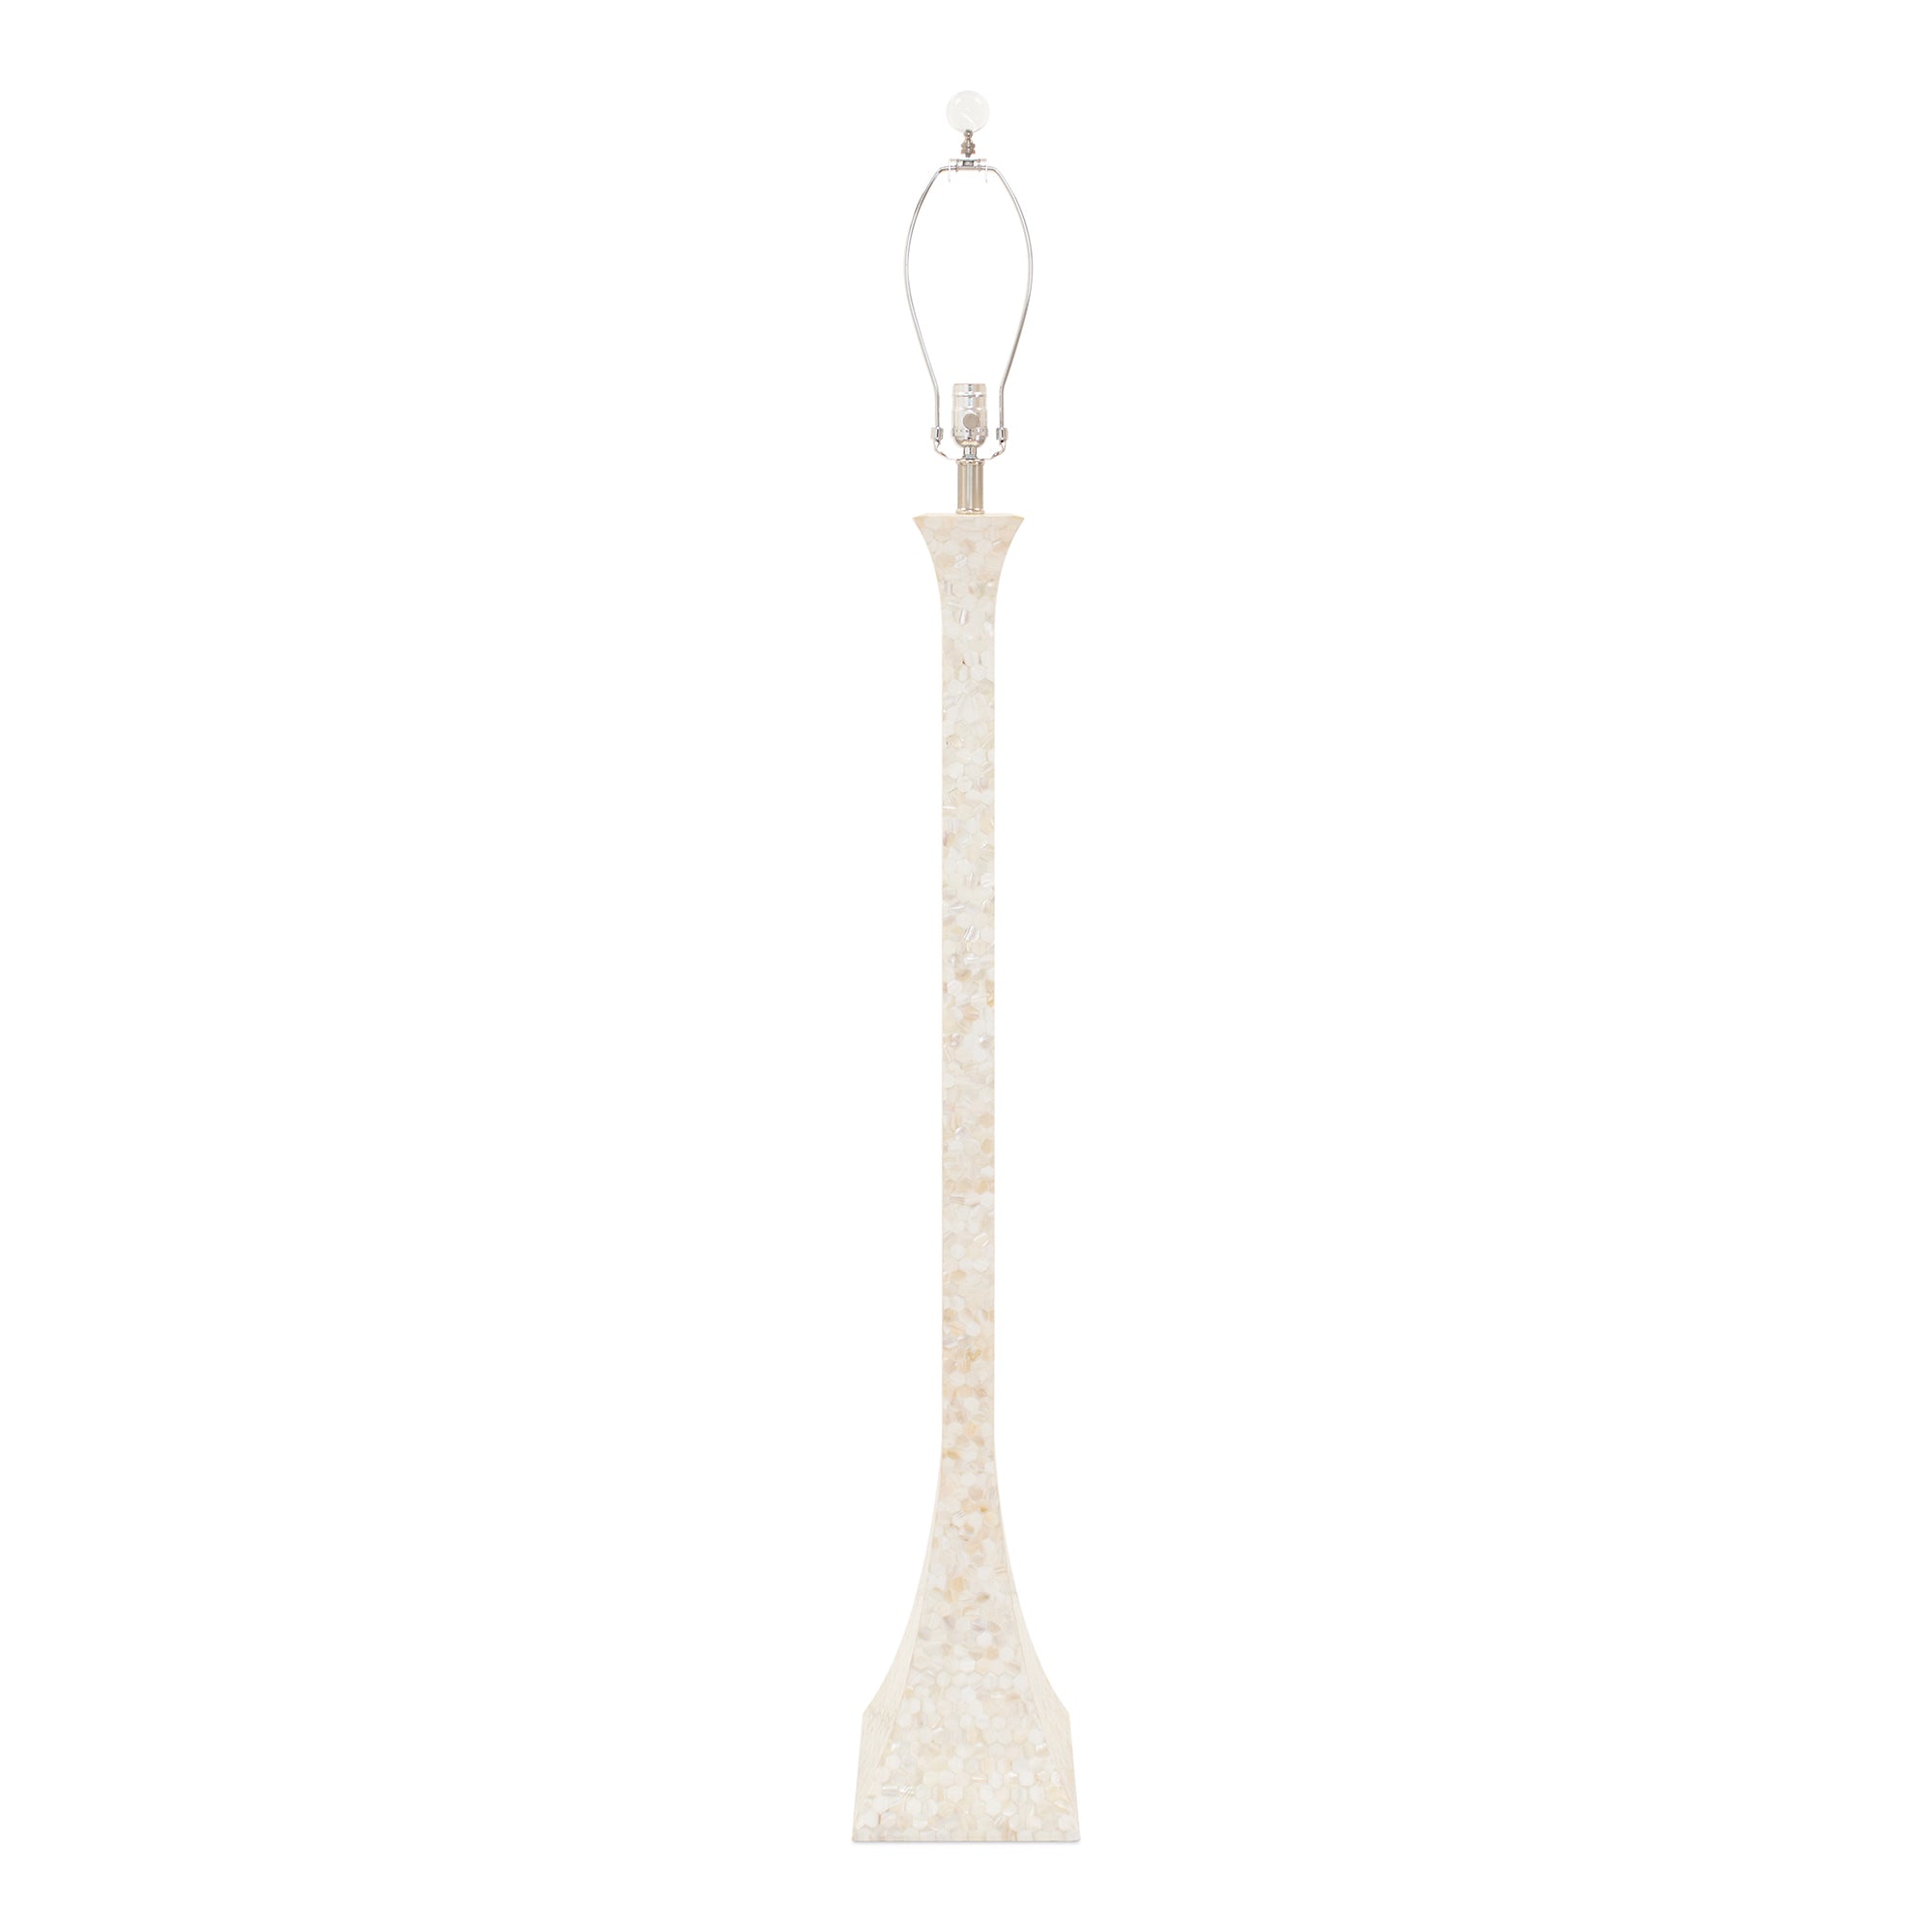 65" Catalina Floor Lamp - Couture Lamps